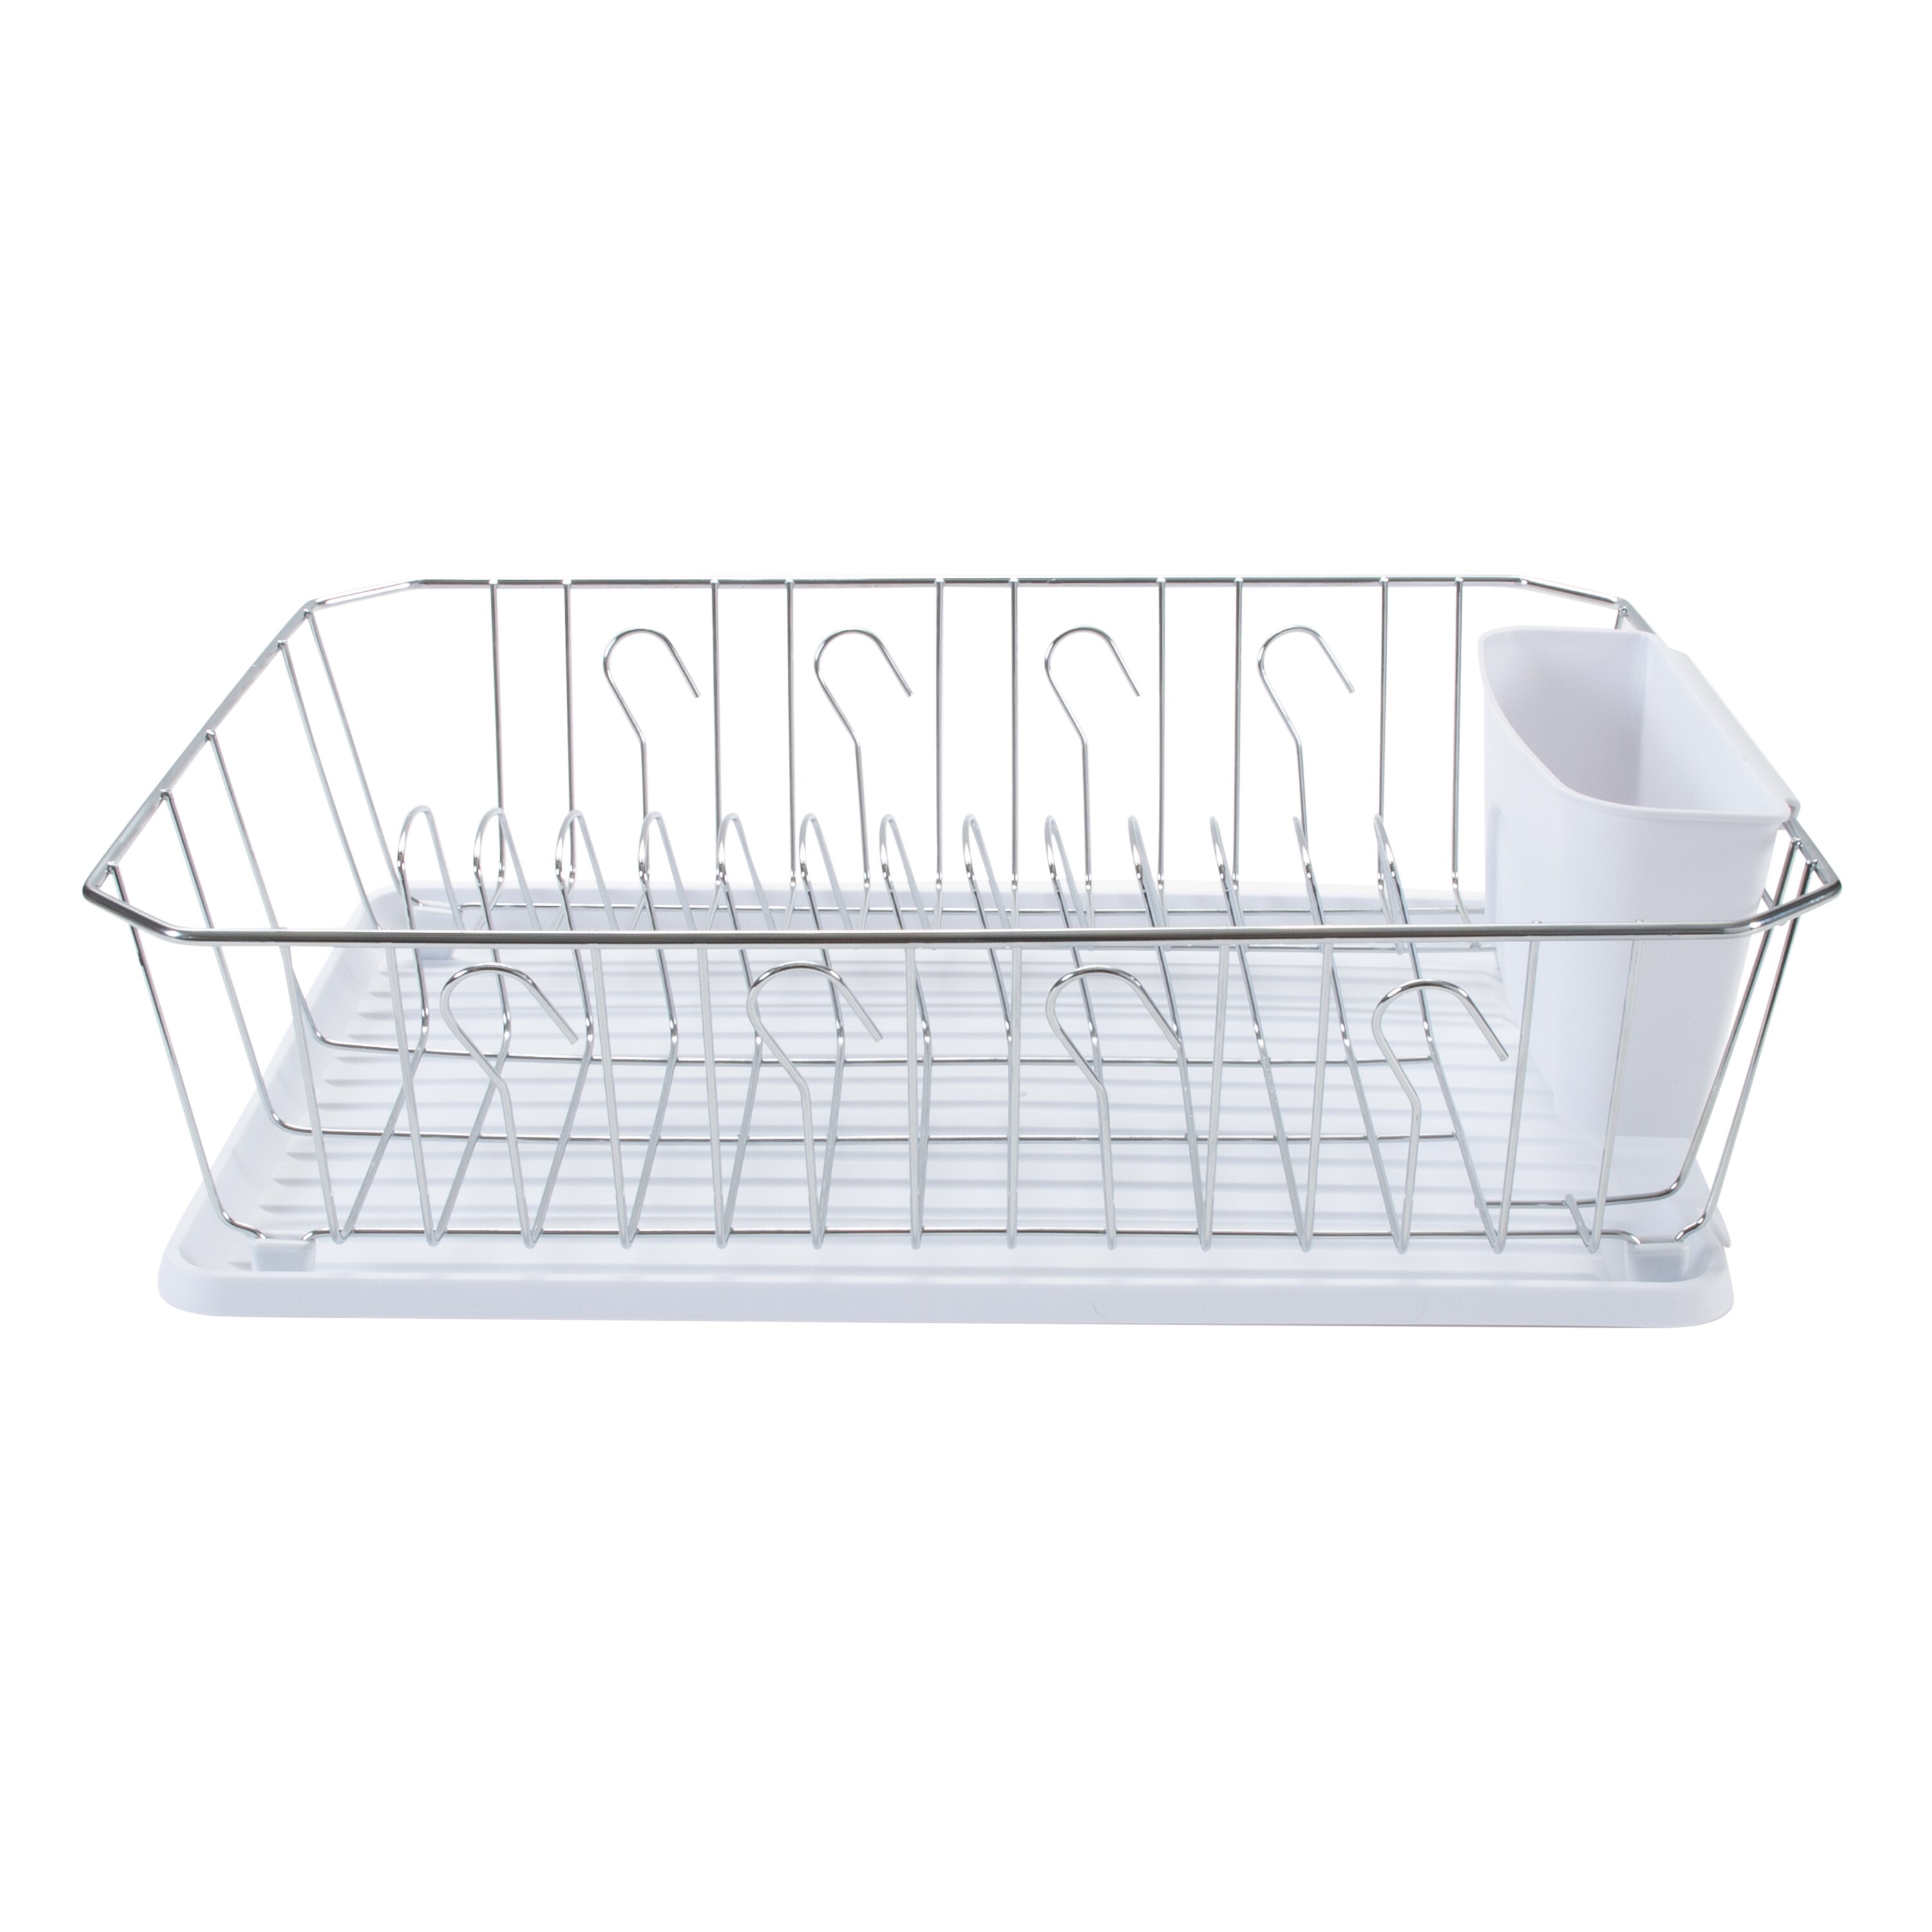 Kitchen Details Large Dish Rack with Tray in Silver 15100-SILVER - The Home  Depot